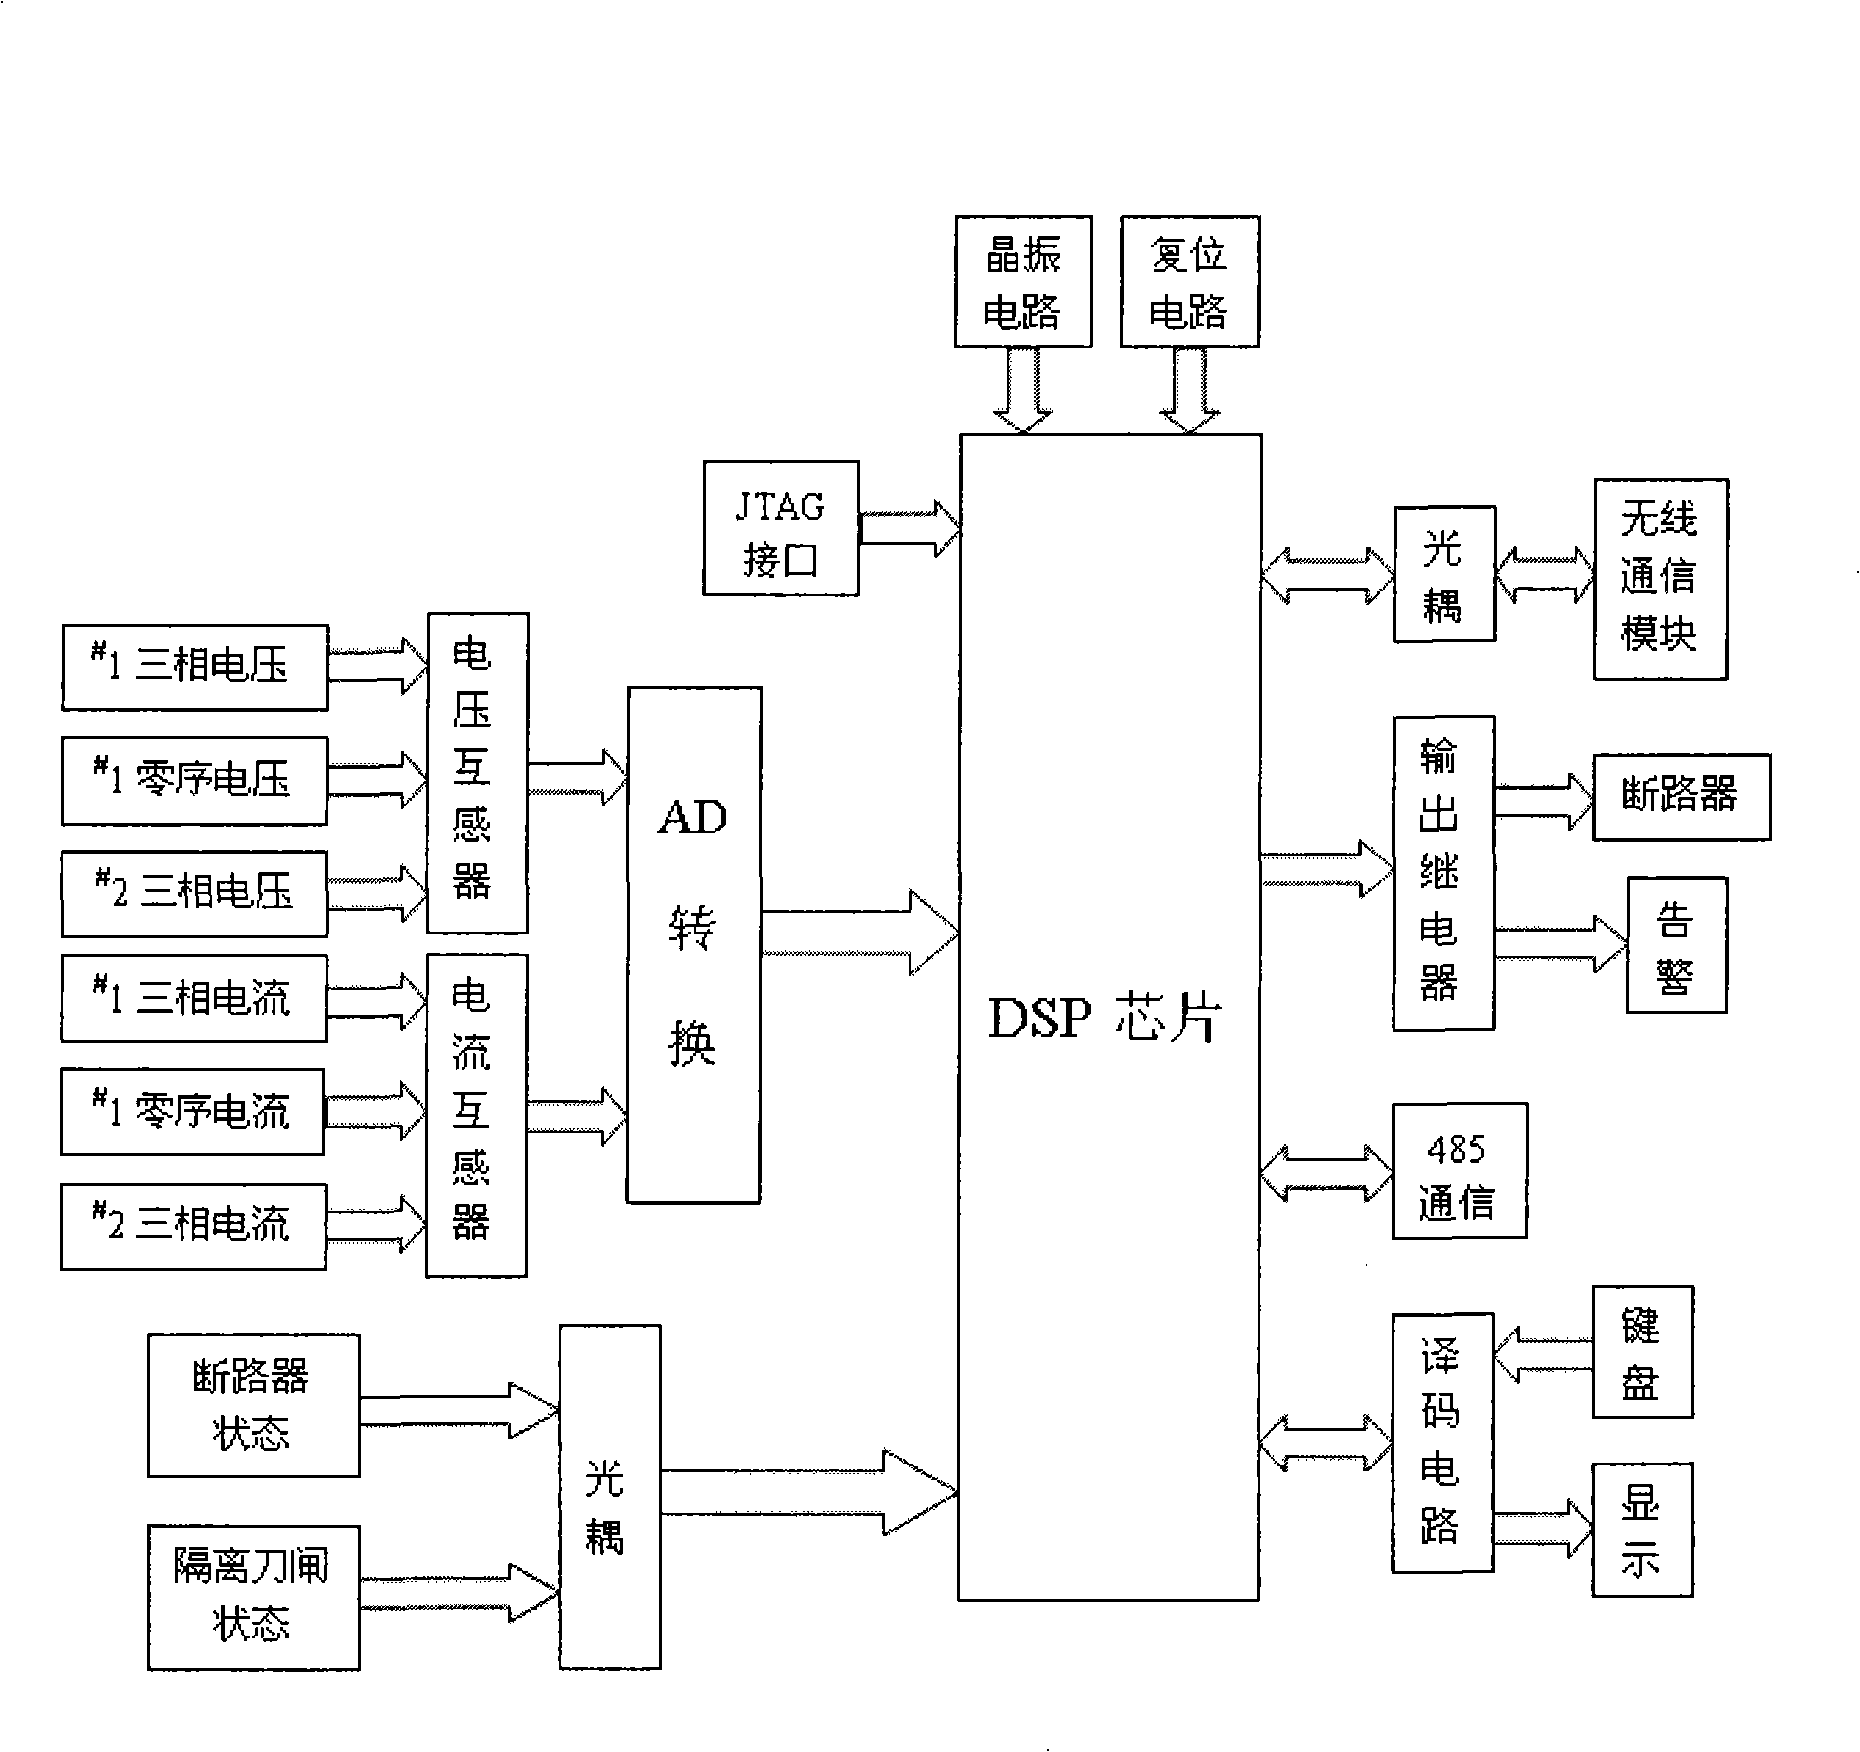 Integrated system for monitor, management and remotely meter-reading of power distribution network